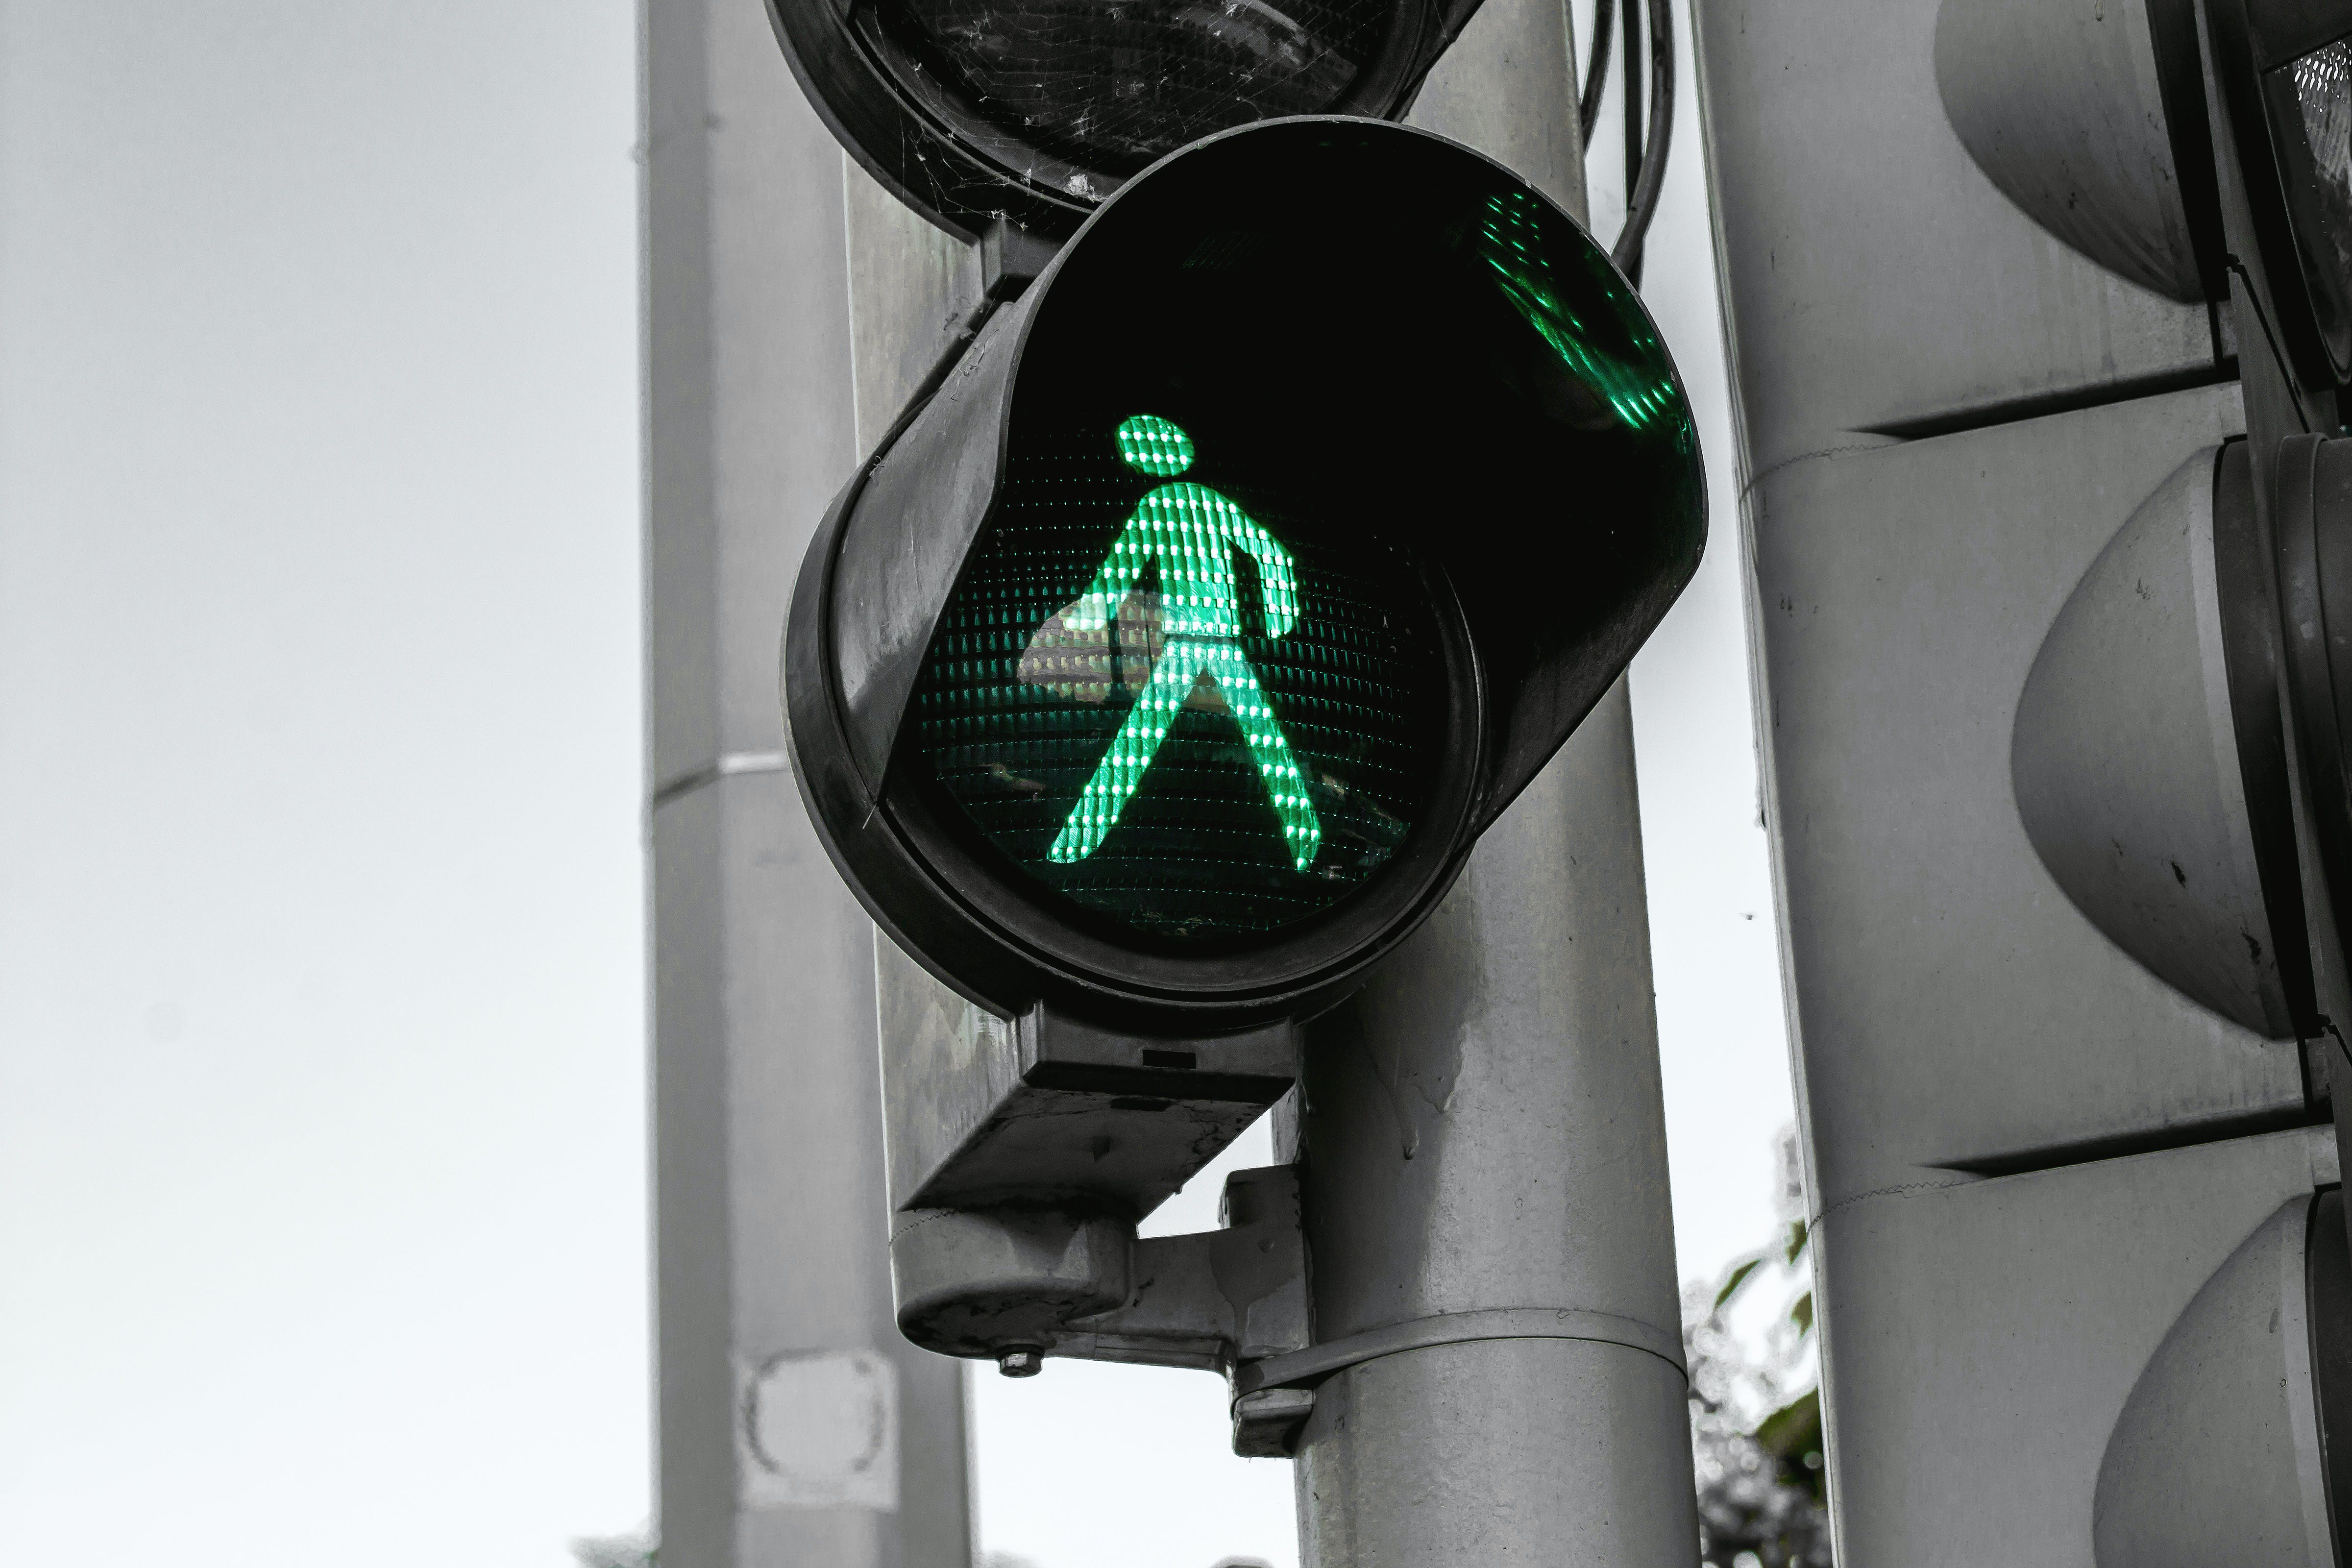 Task imitation is hard for people with executive dysfunction and adhd. Image shows a green walk sign in the city to represent starting tasks.